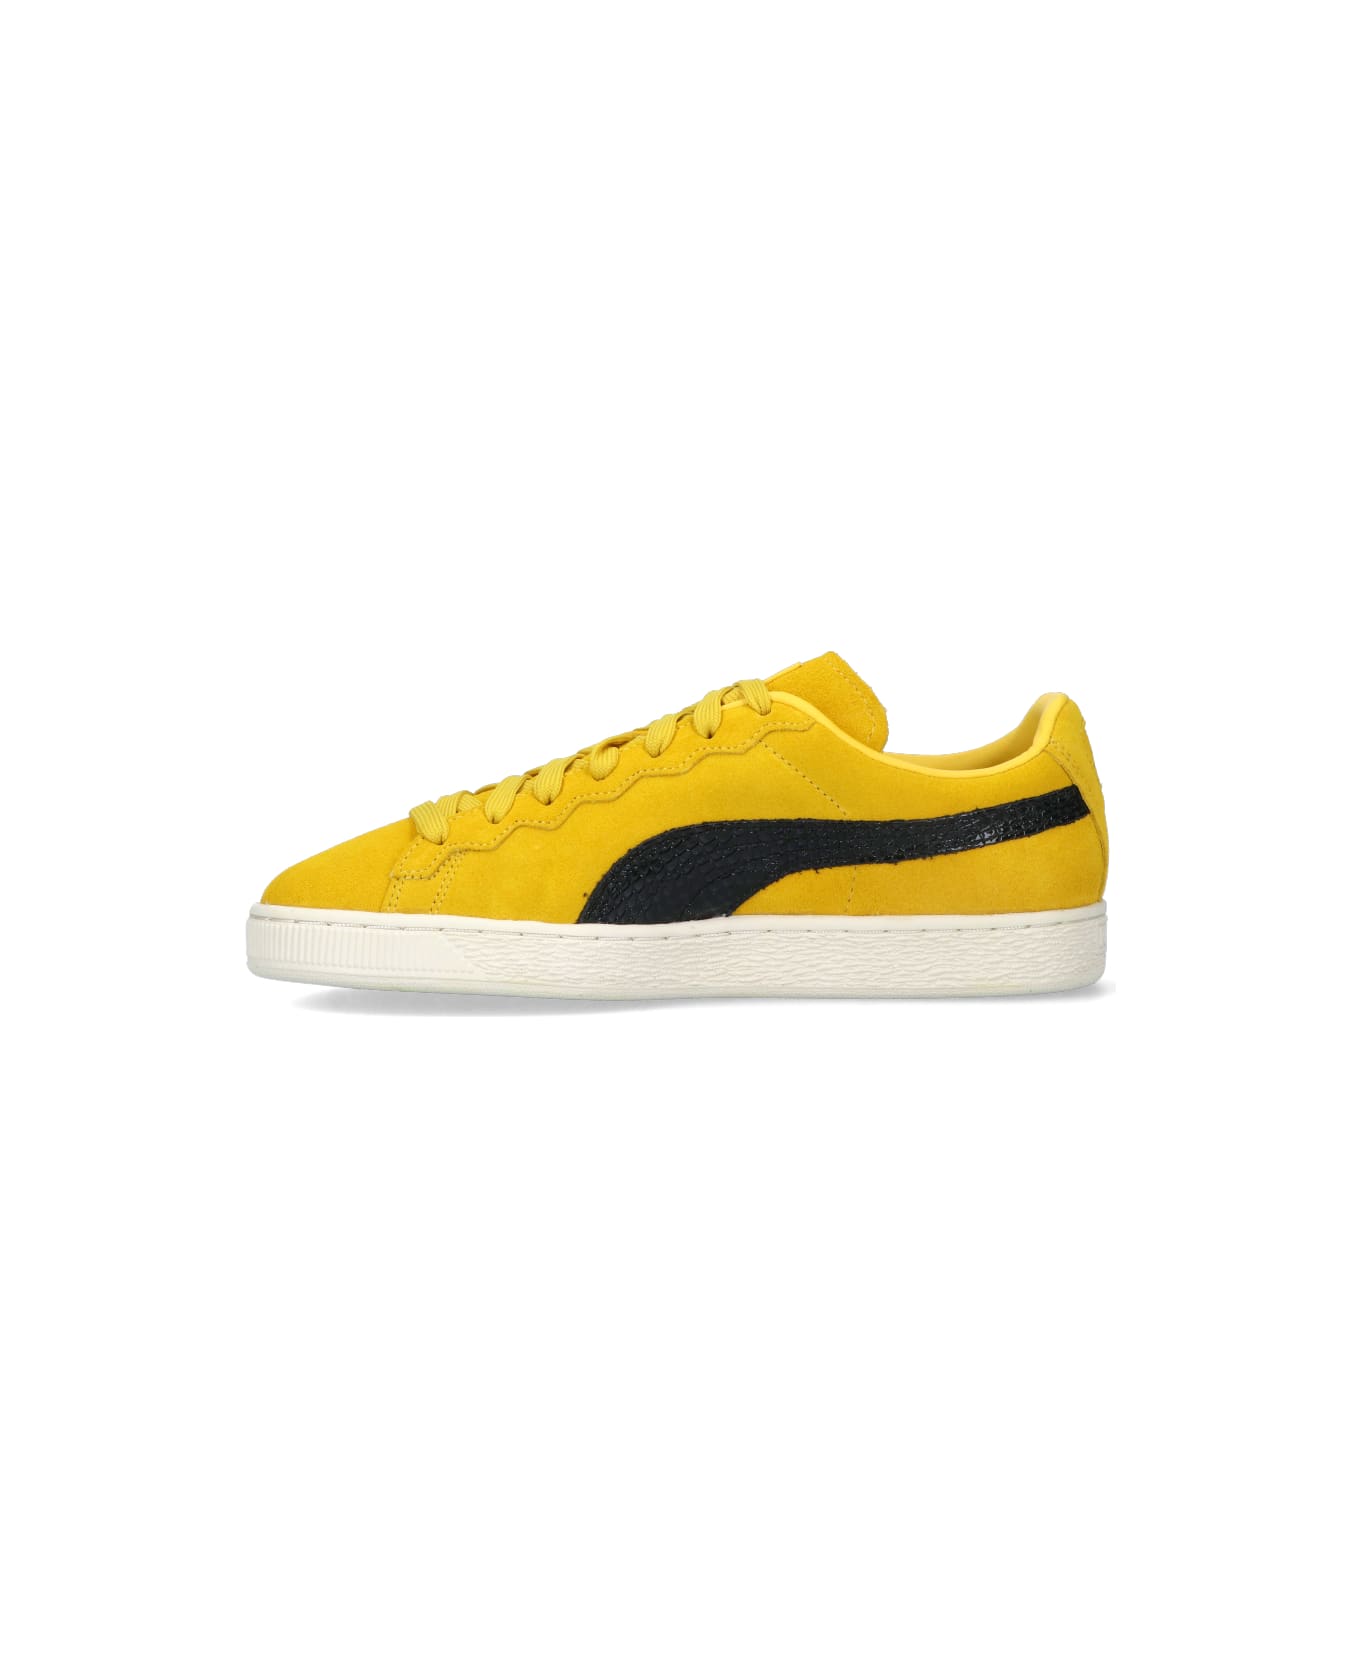 Puma X Staple Suede Low Sneakers - Yellow スニーカー